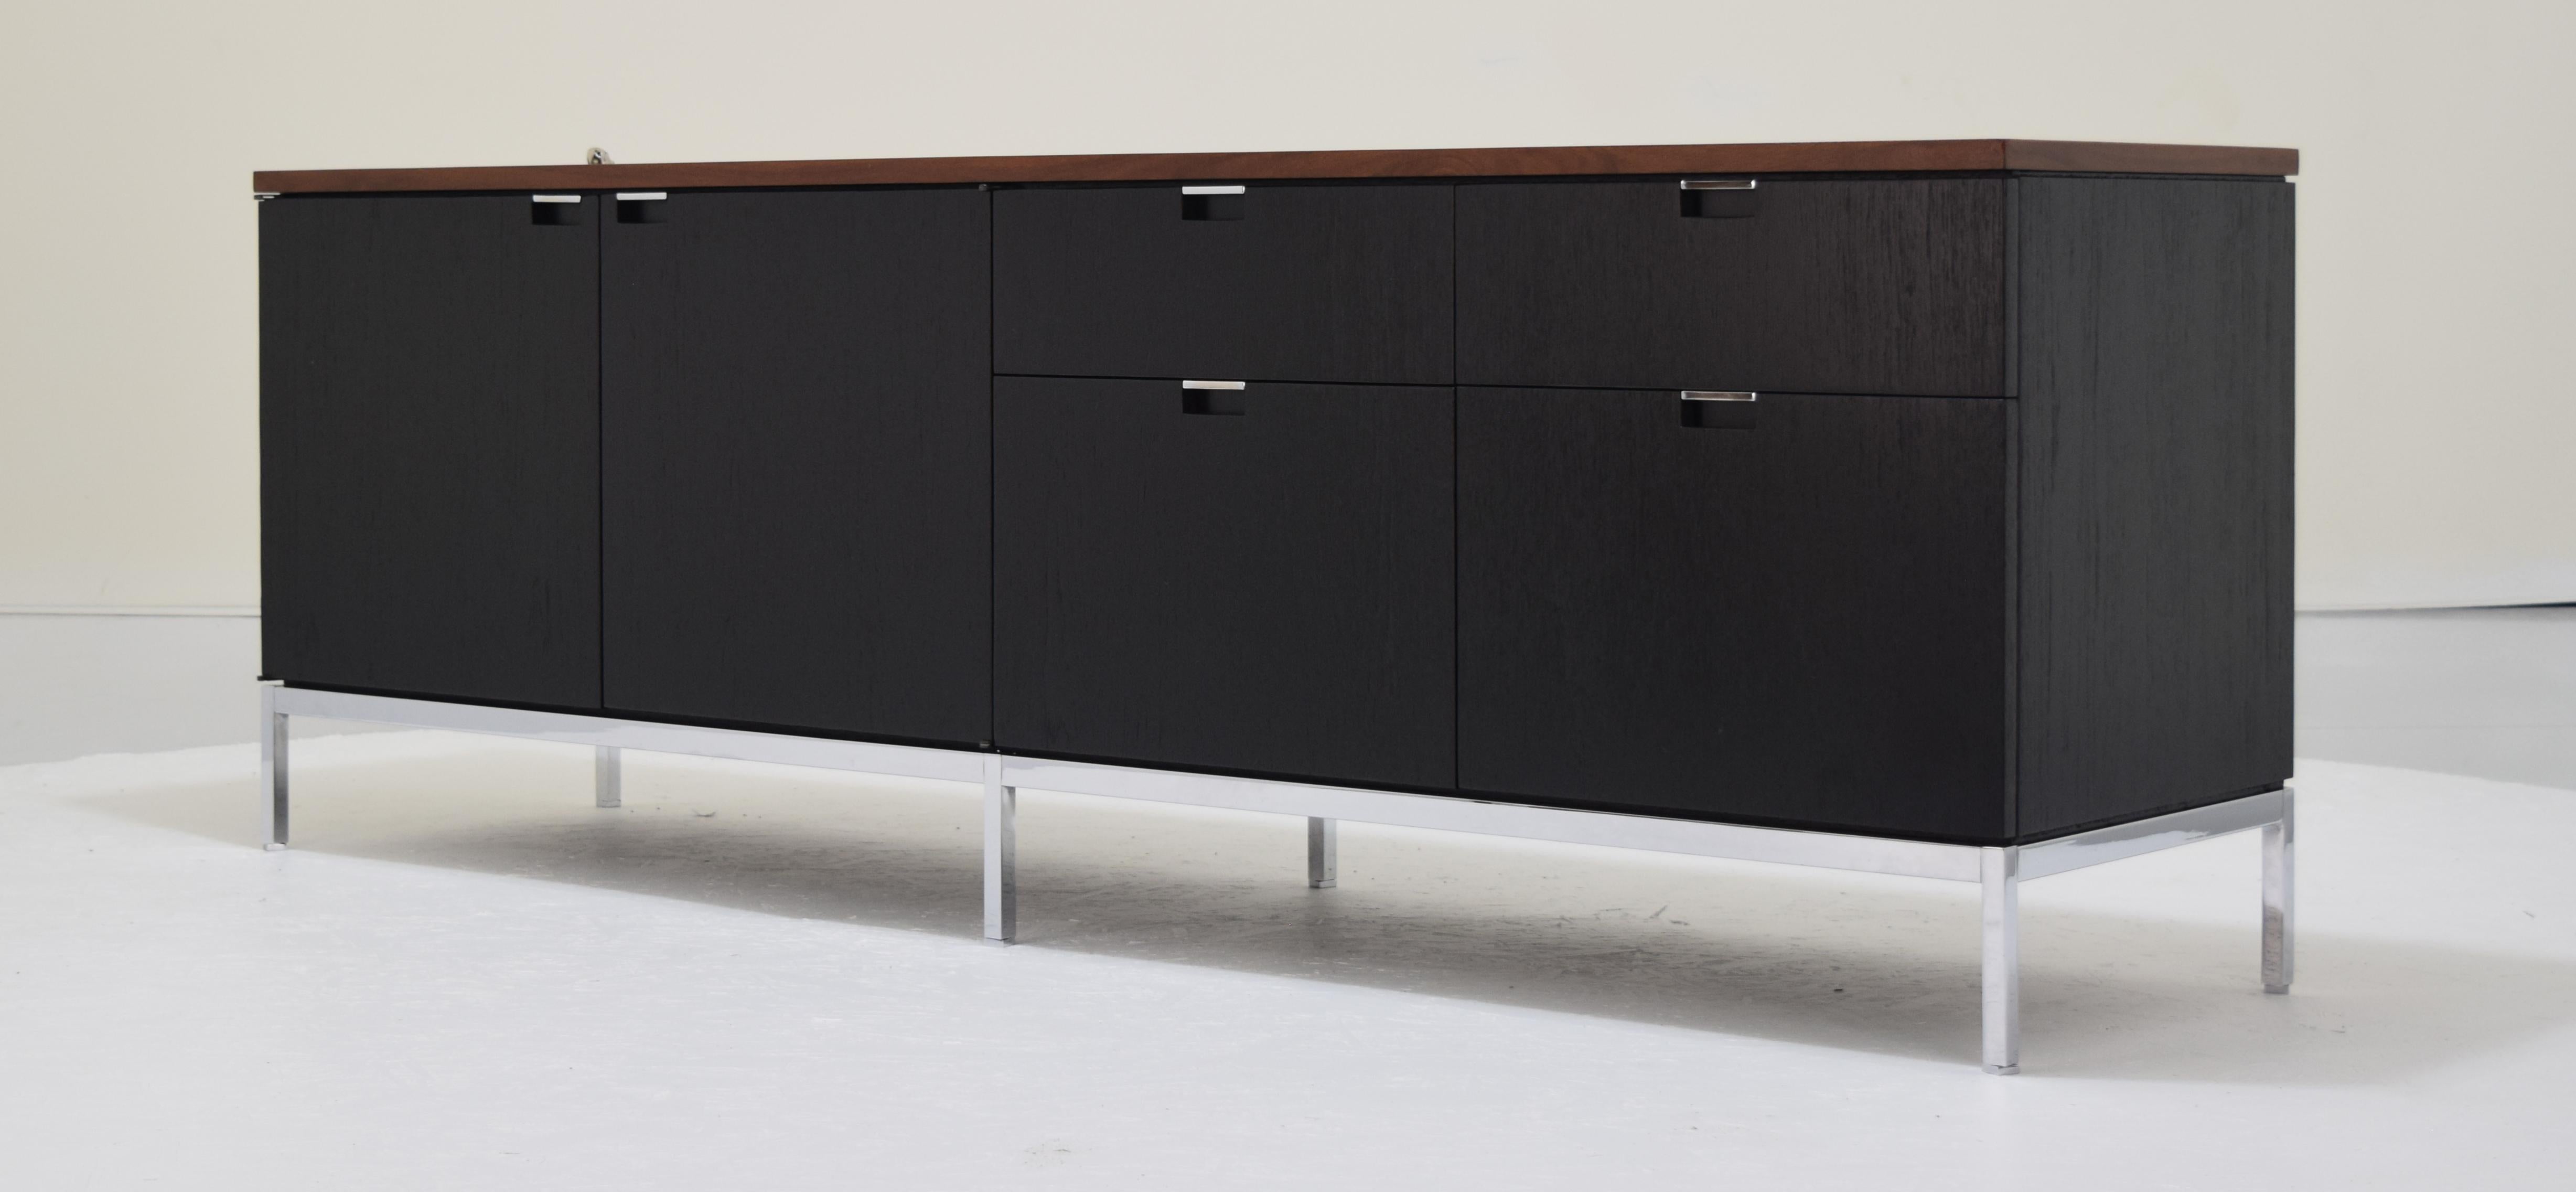 An sleek, elegant Knoll executive credenza in ebonized wood with rare rosewood top. Designed by Florence Knoll in 1961 and manufactured by Knoll International. There are two of these credenzas available, this listing is for one. 

Measures: 74.5 x